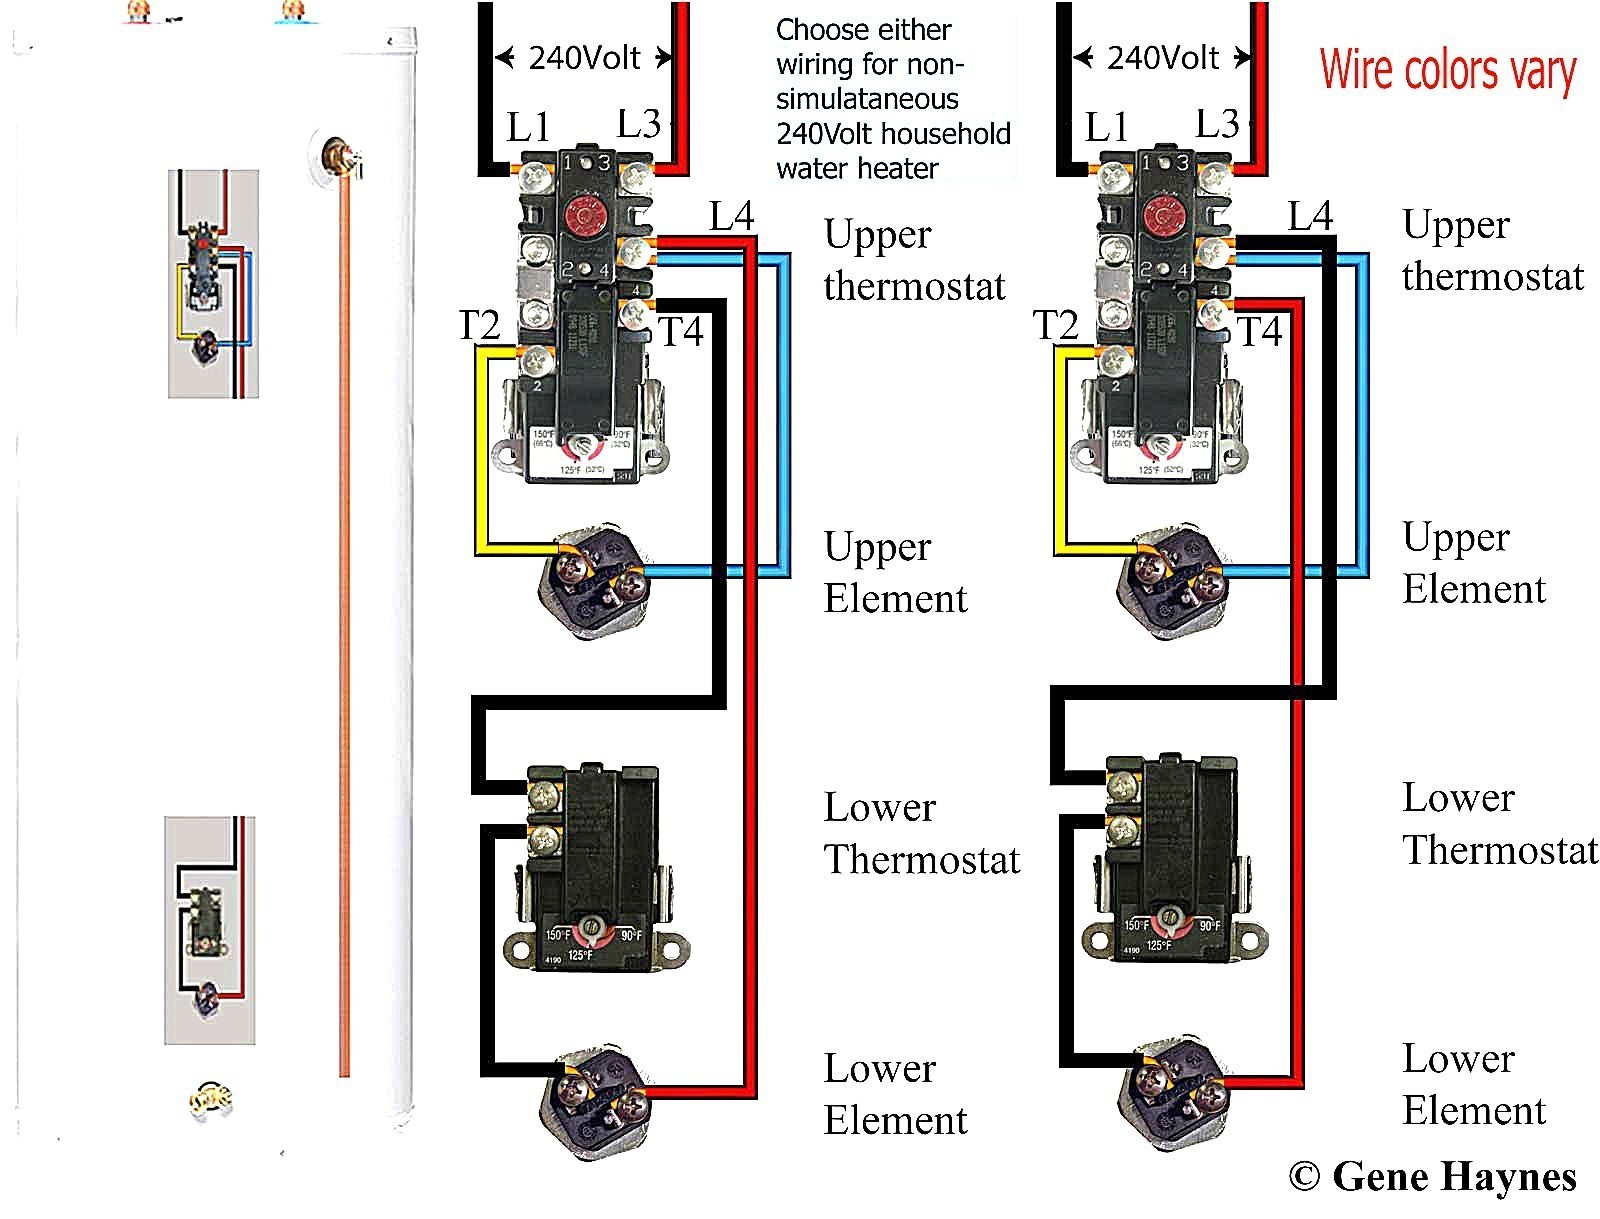 Wiring Diagram Electric Water Heater Fresh Wiring Diagram for An Electric Water Heater Refrence Electric Water